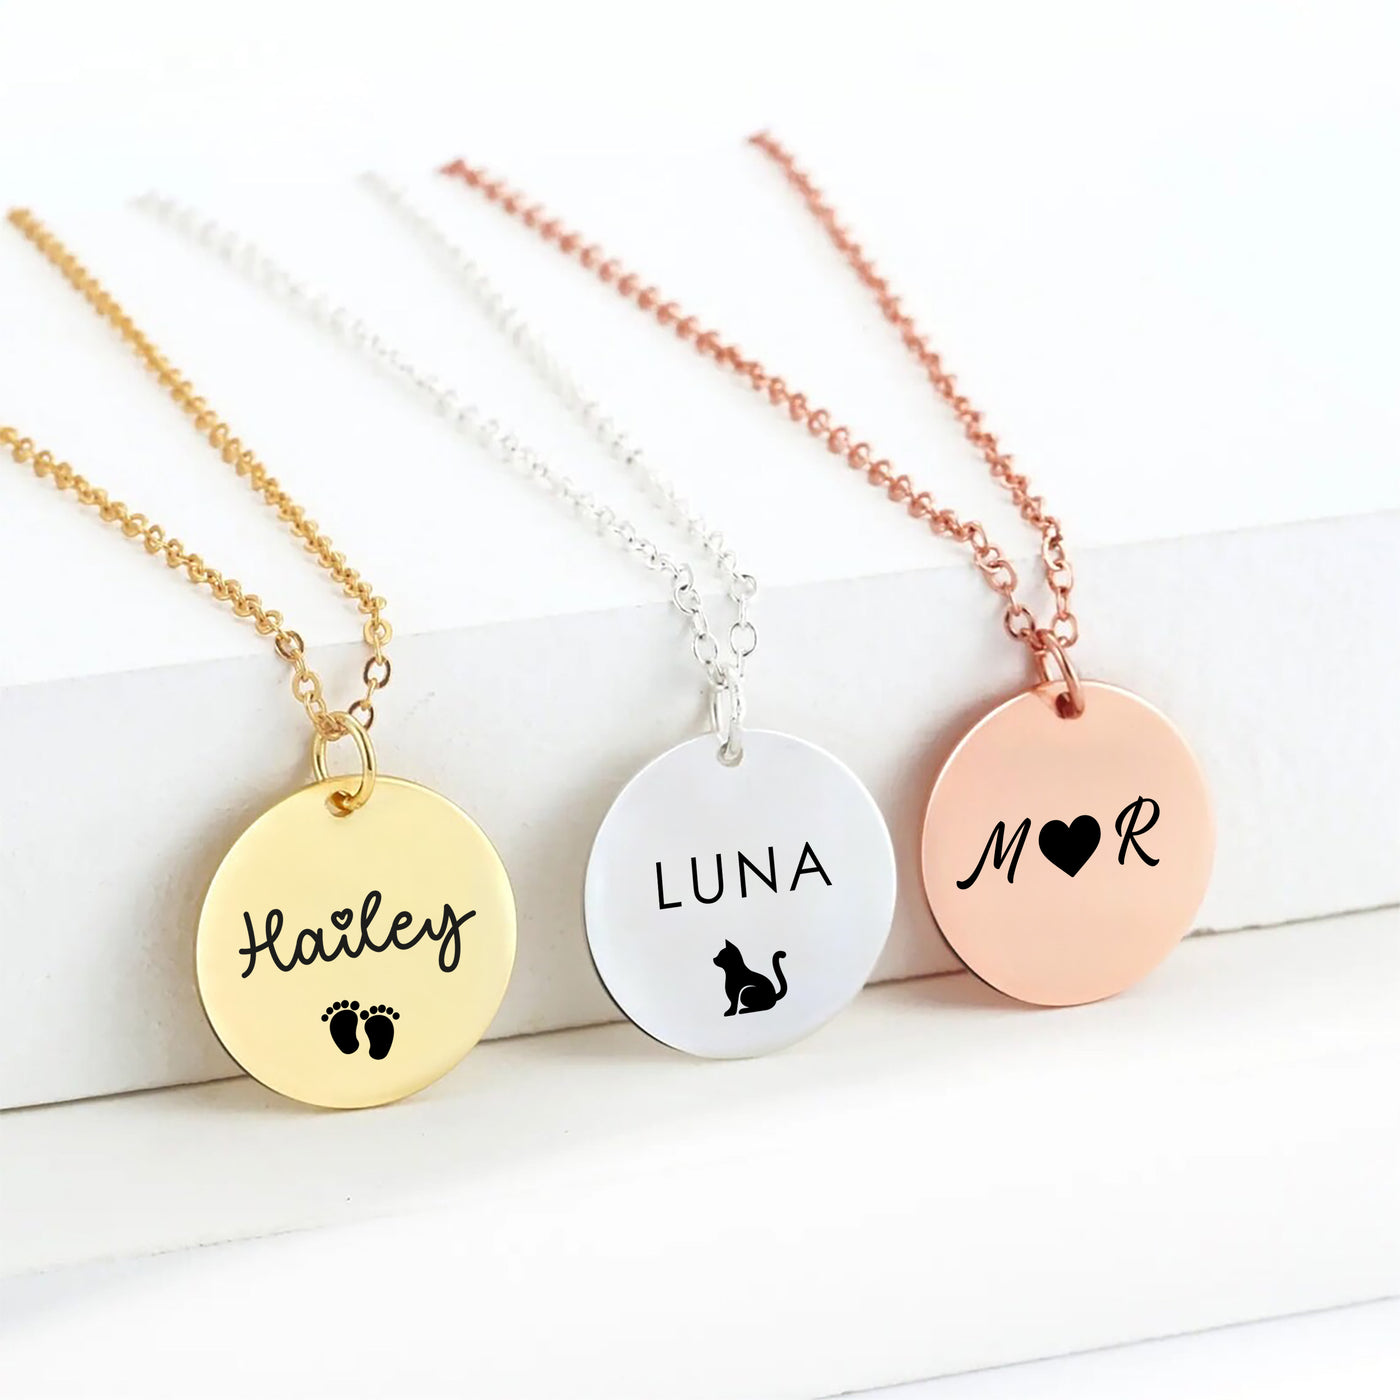 To My Soulmate - Disc Necklace - Black